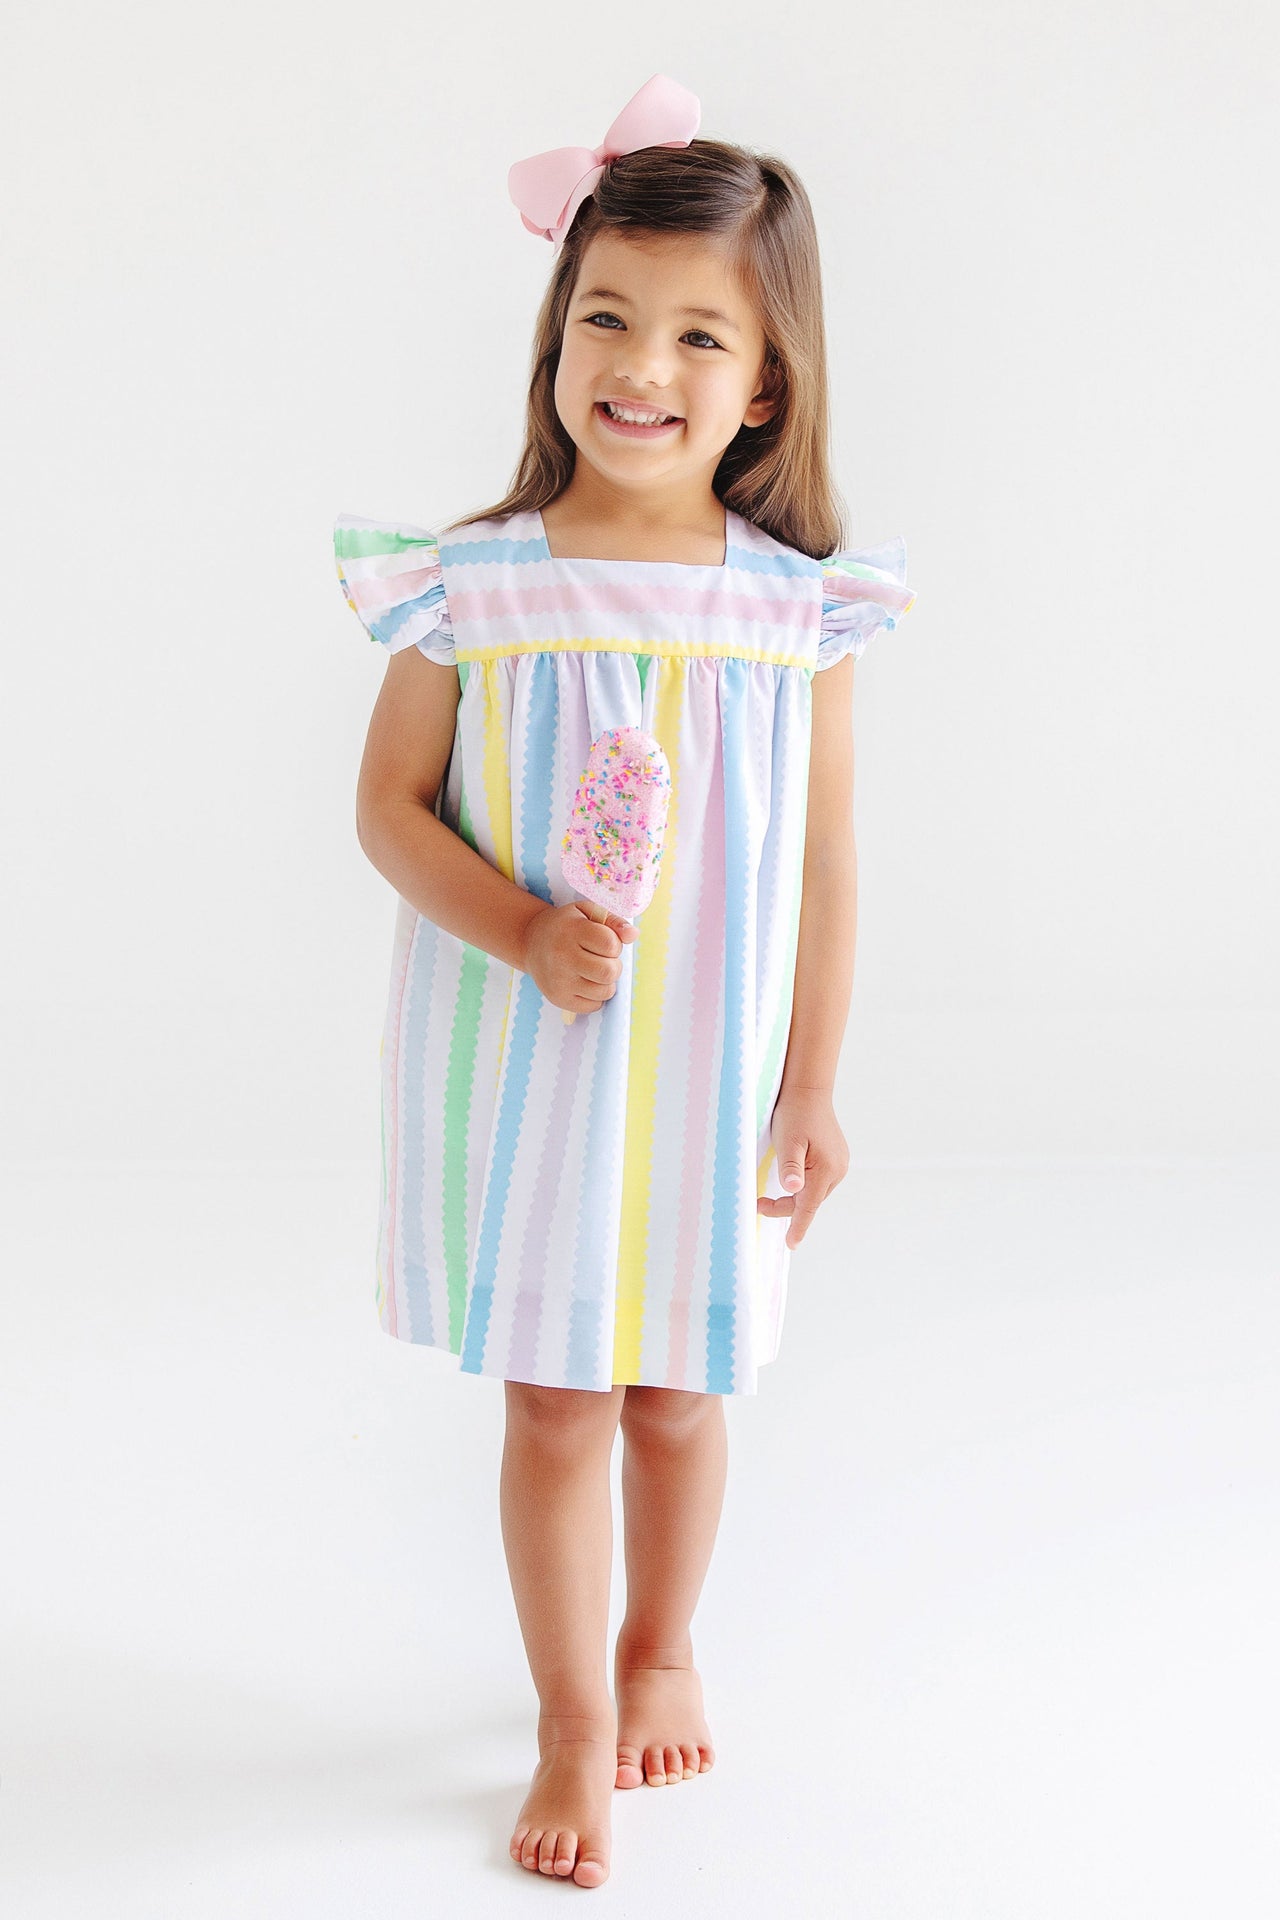 Rosemary Ruffle Dress | Wellington Wiggle Stripe With Pier Party Pink